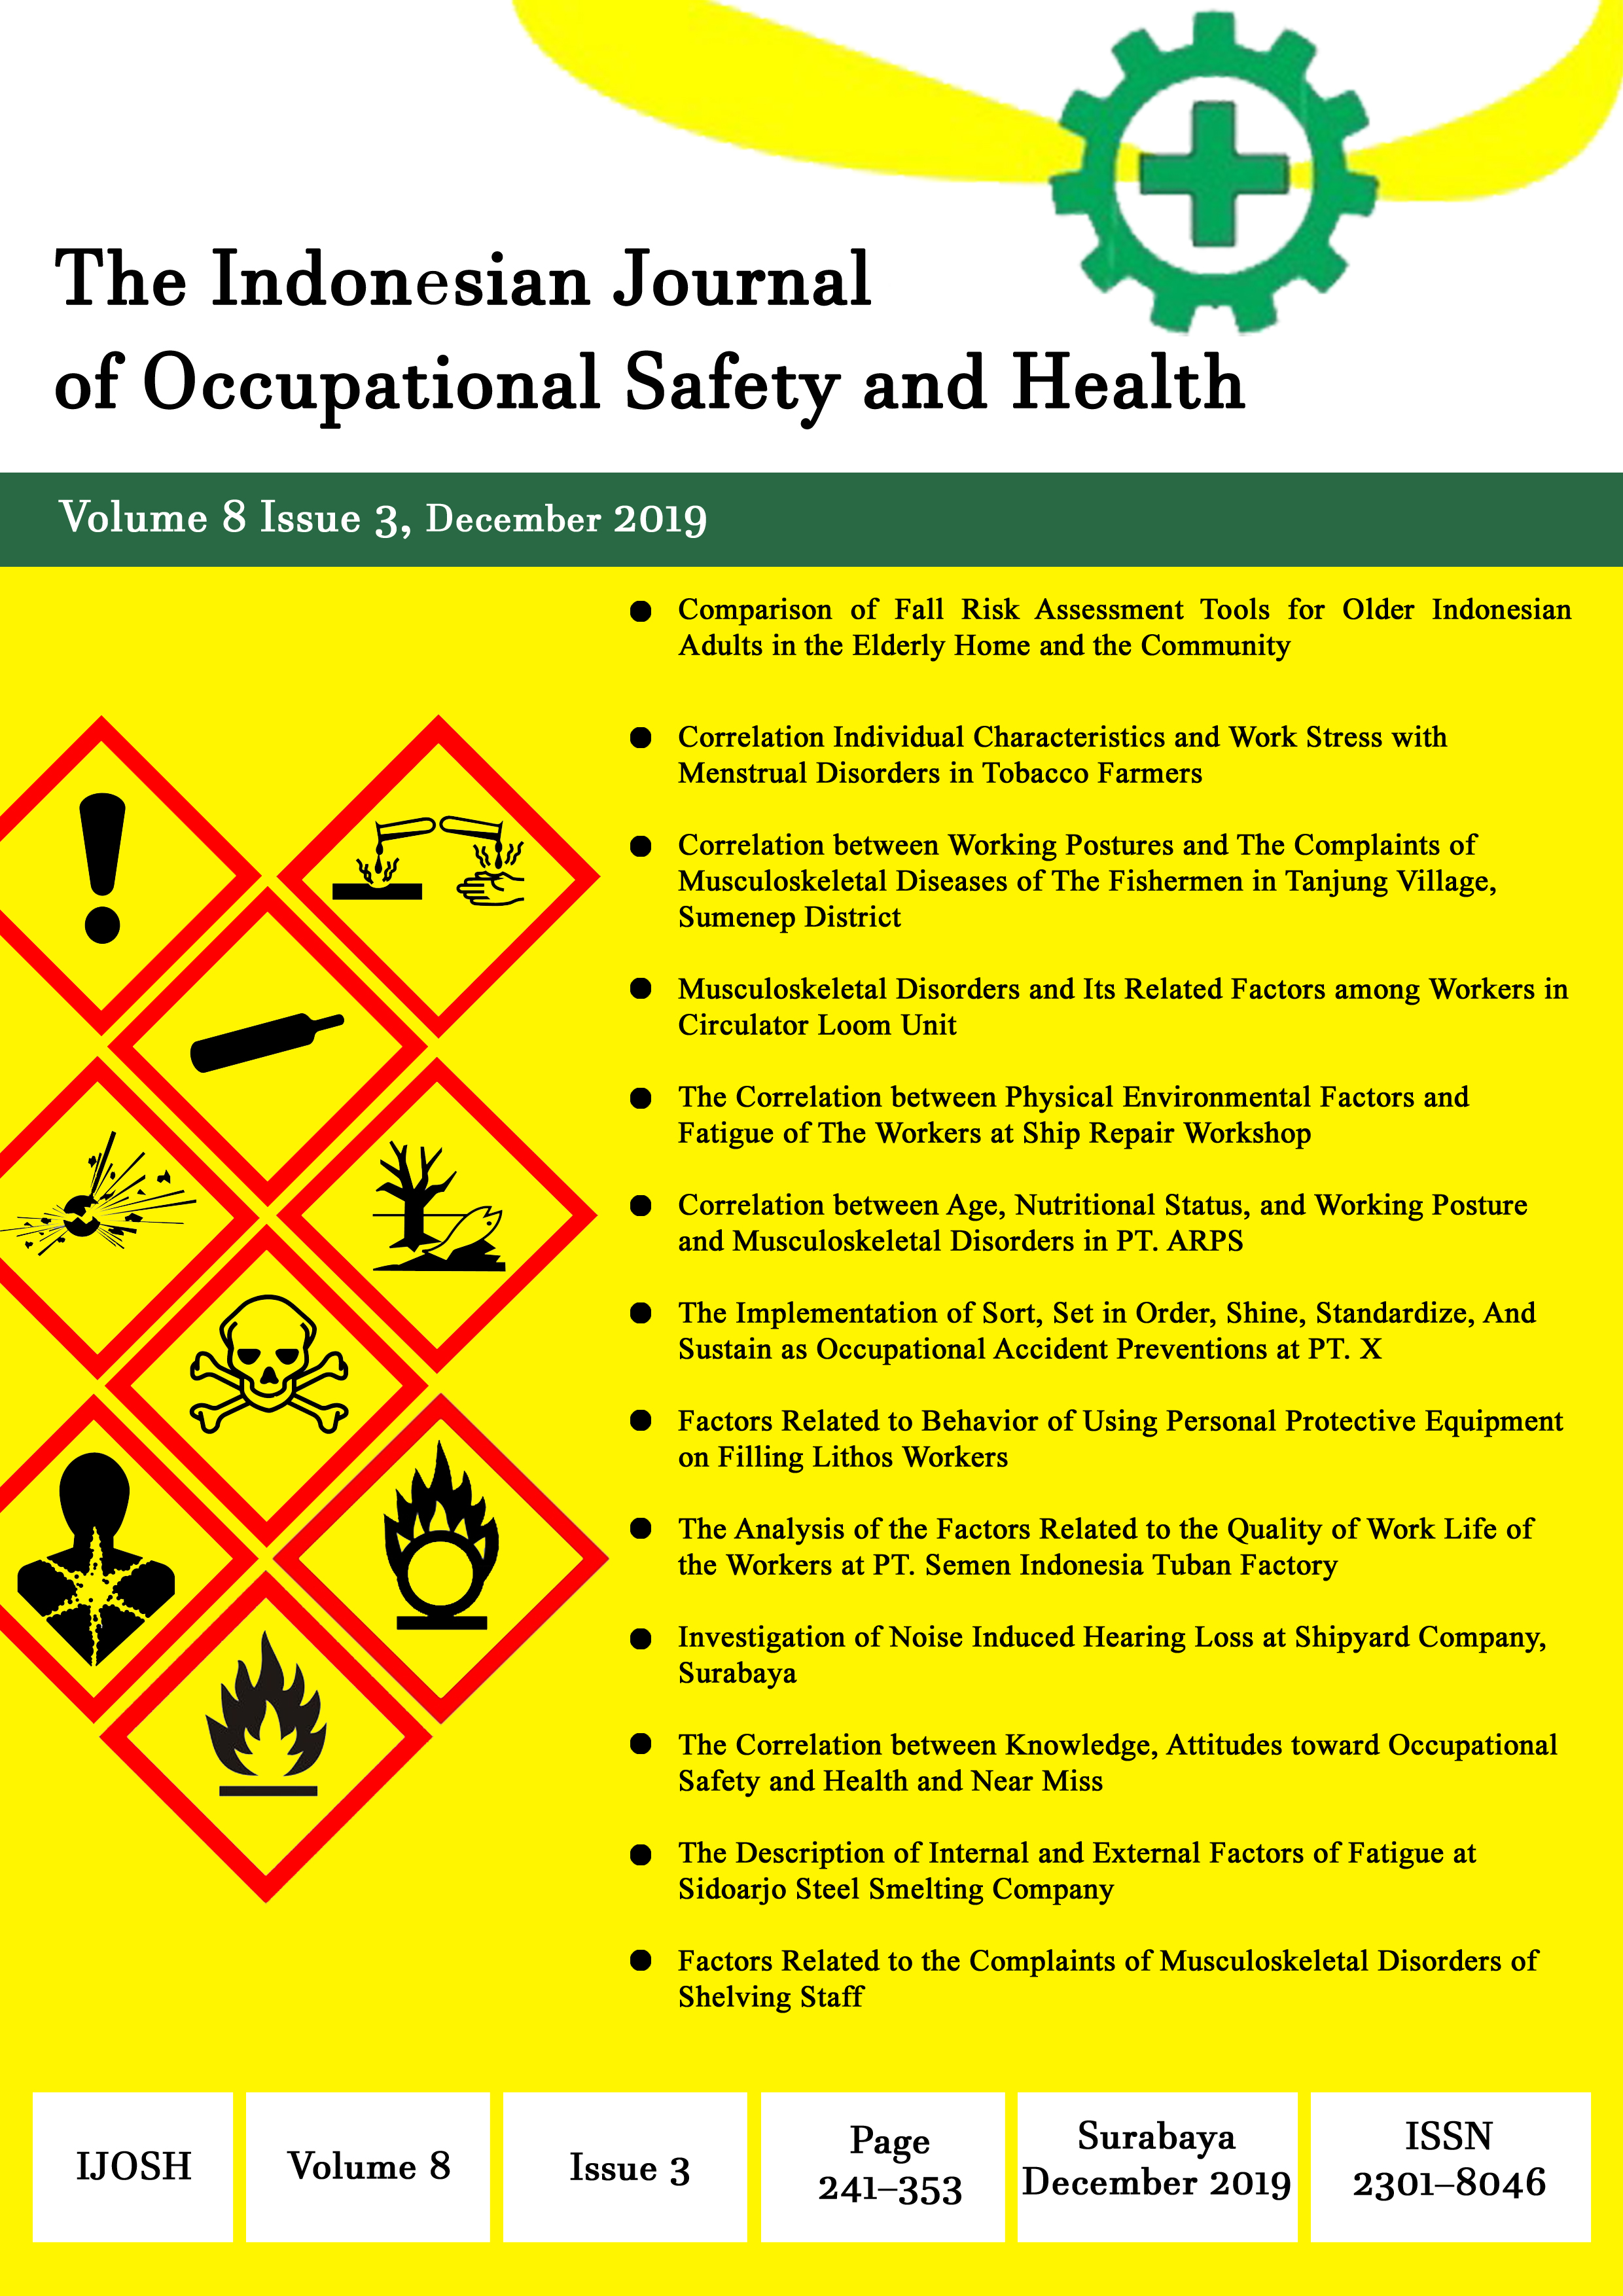 						View Vol. 8 No. 3 (2019): The Indonesian Journal of Occupational Safety and Health
					